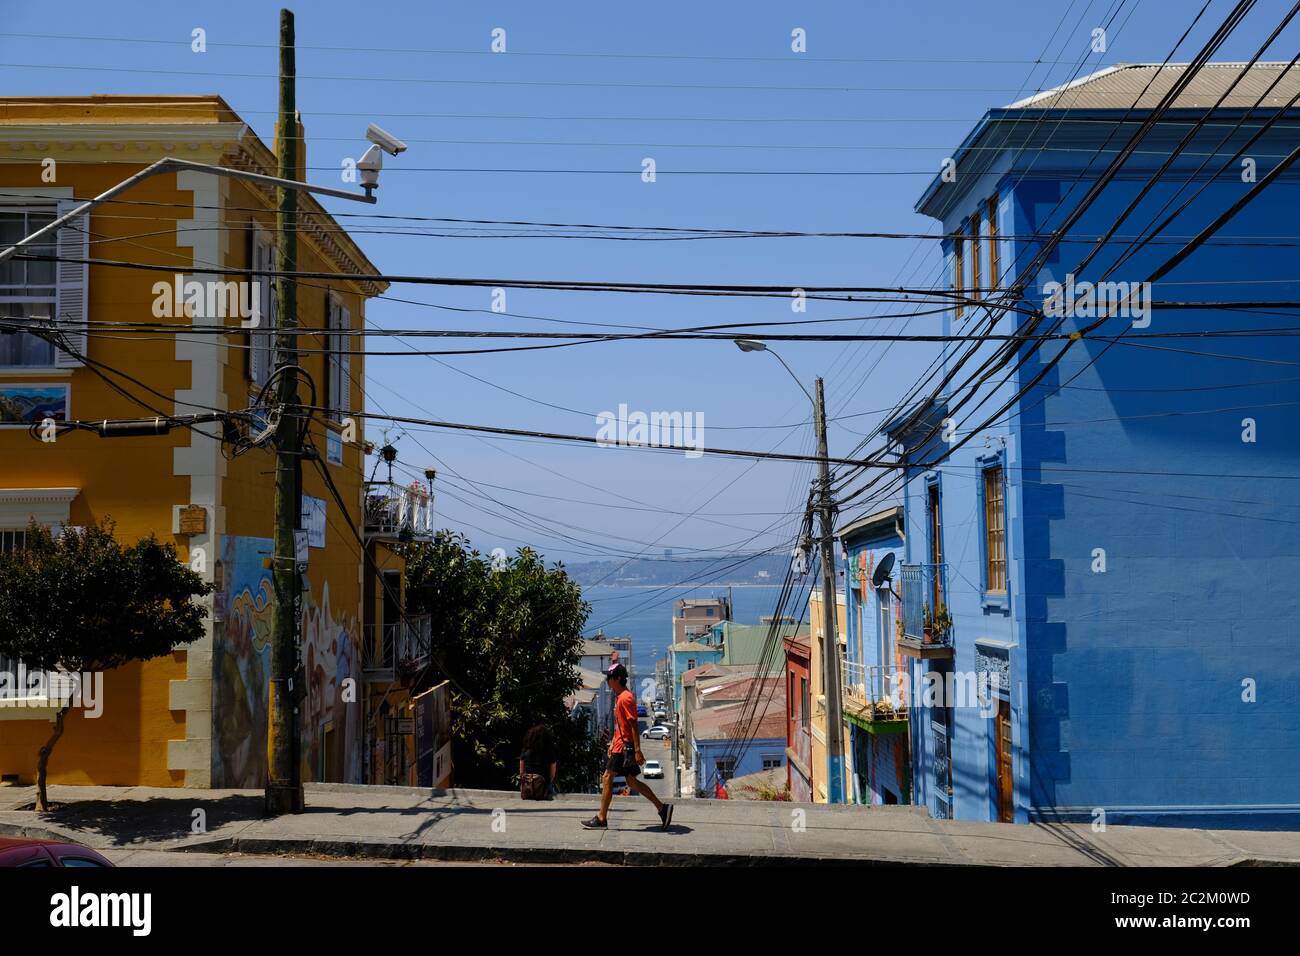 Chile Valparaiso - Street view painted houses Stock Photo